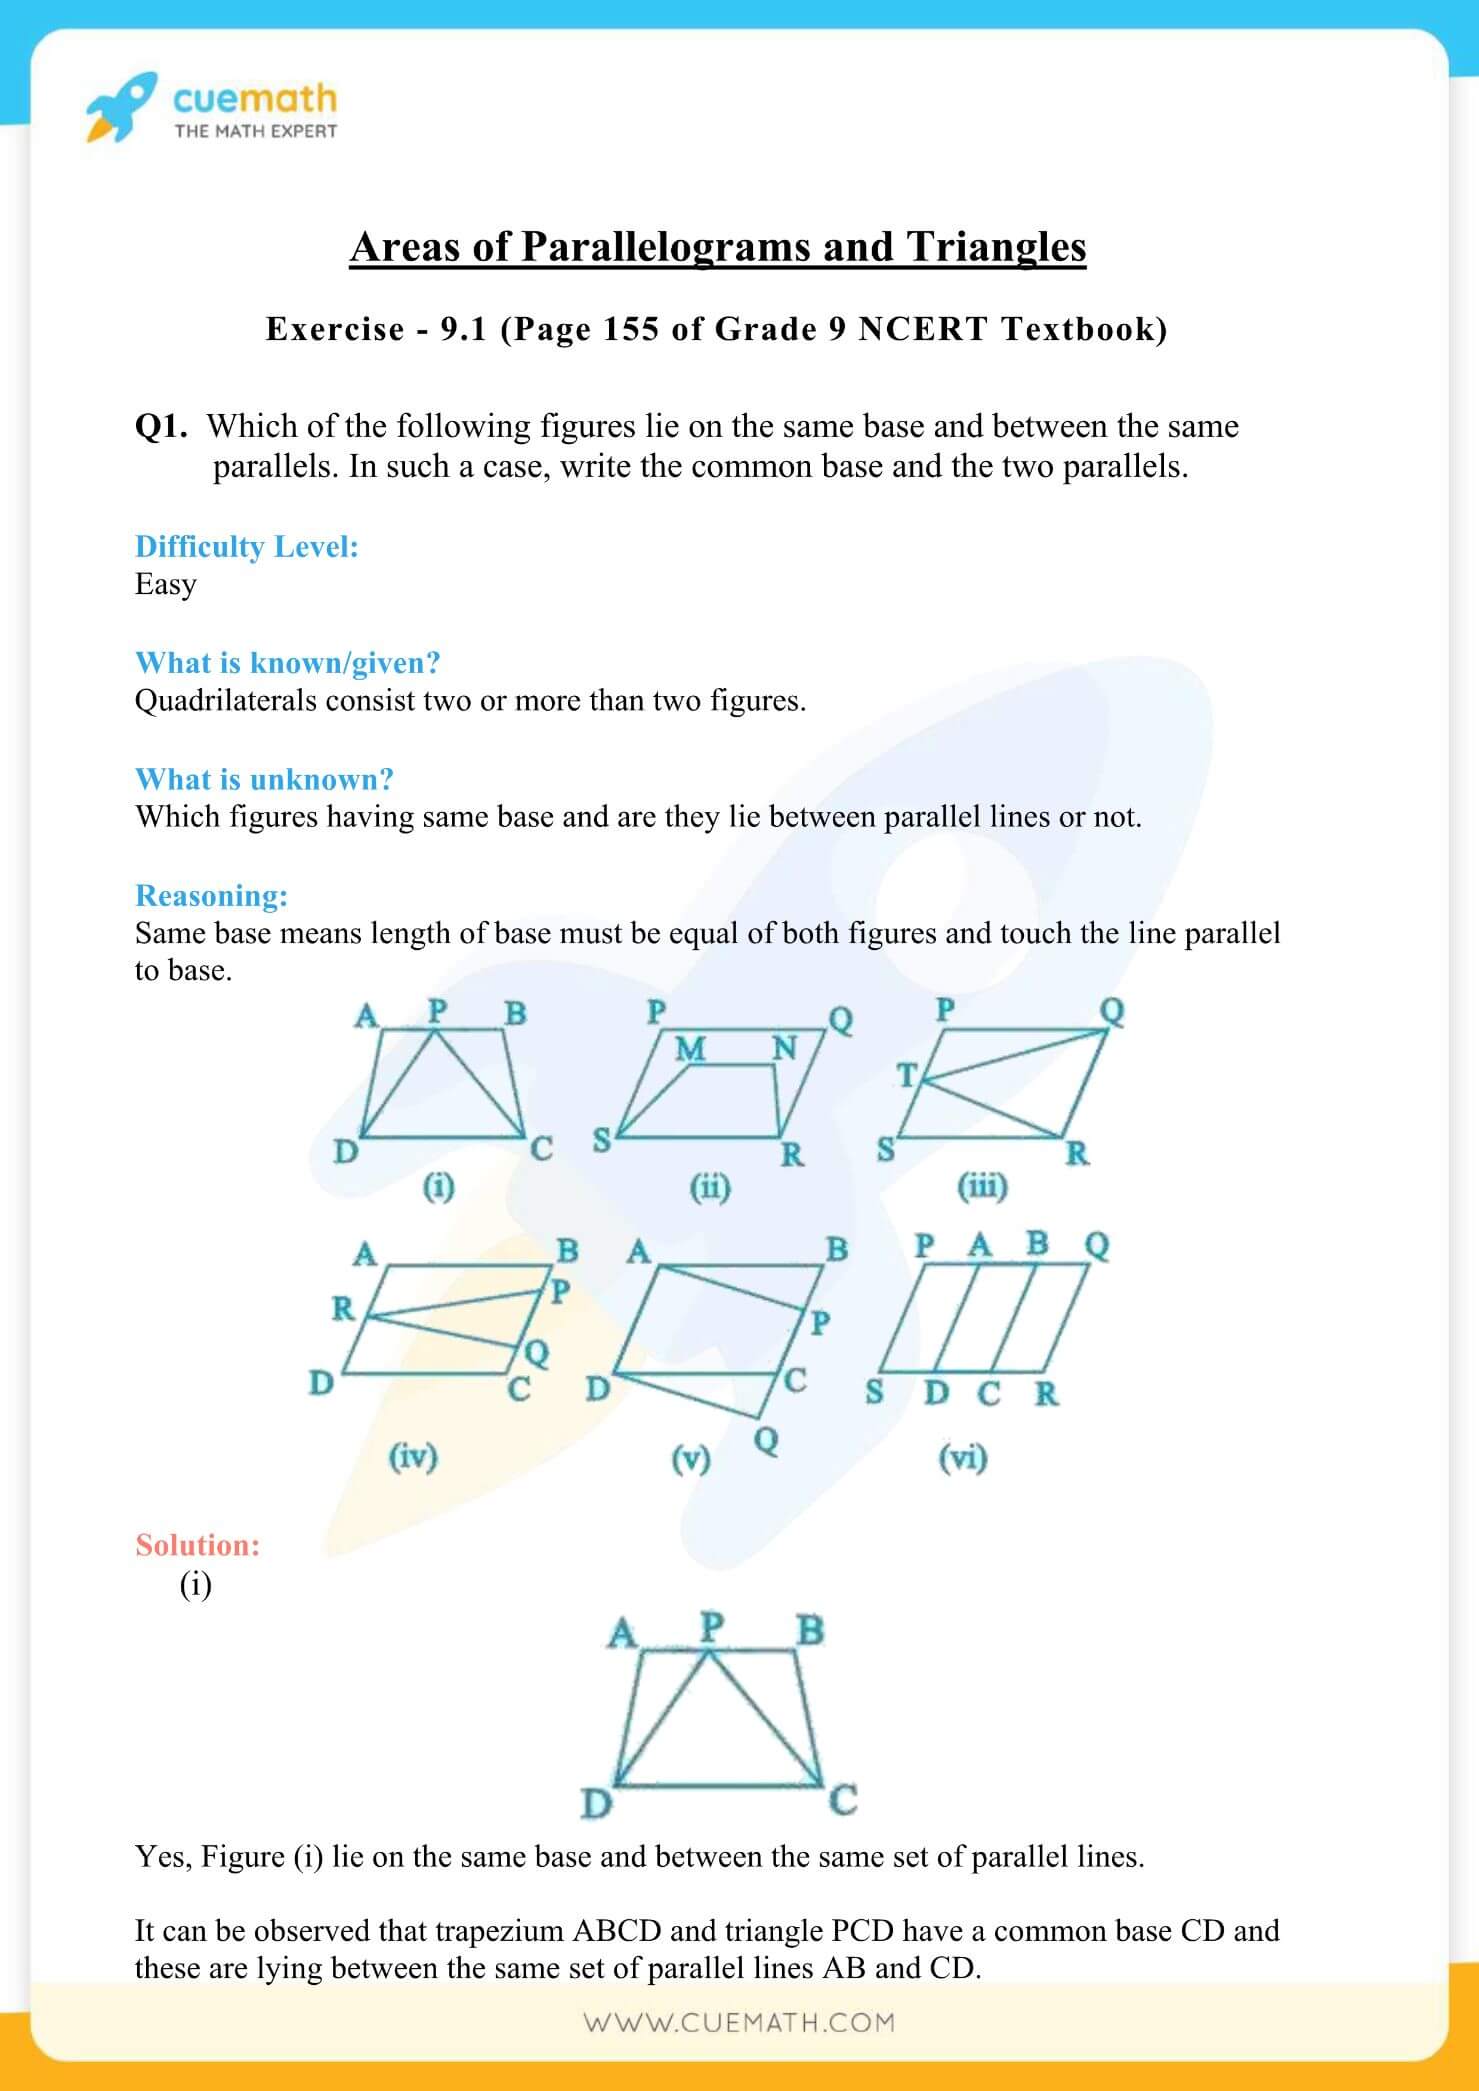 NCERT Solutions Class 9 Math Chapter 9 Areas Of Parallelograms And Triangles 1